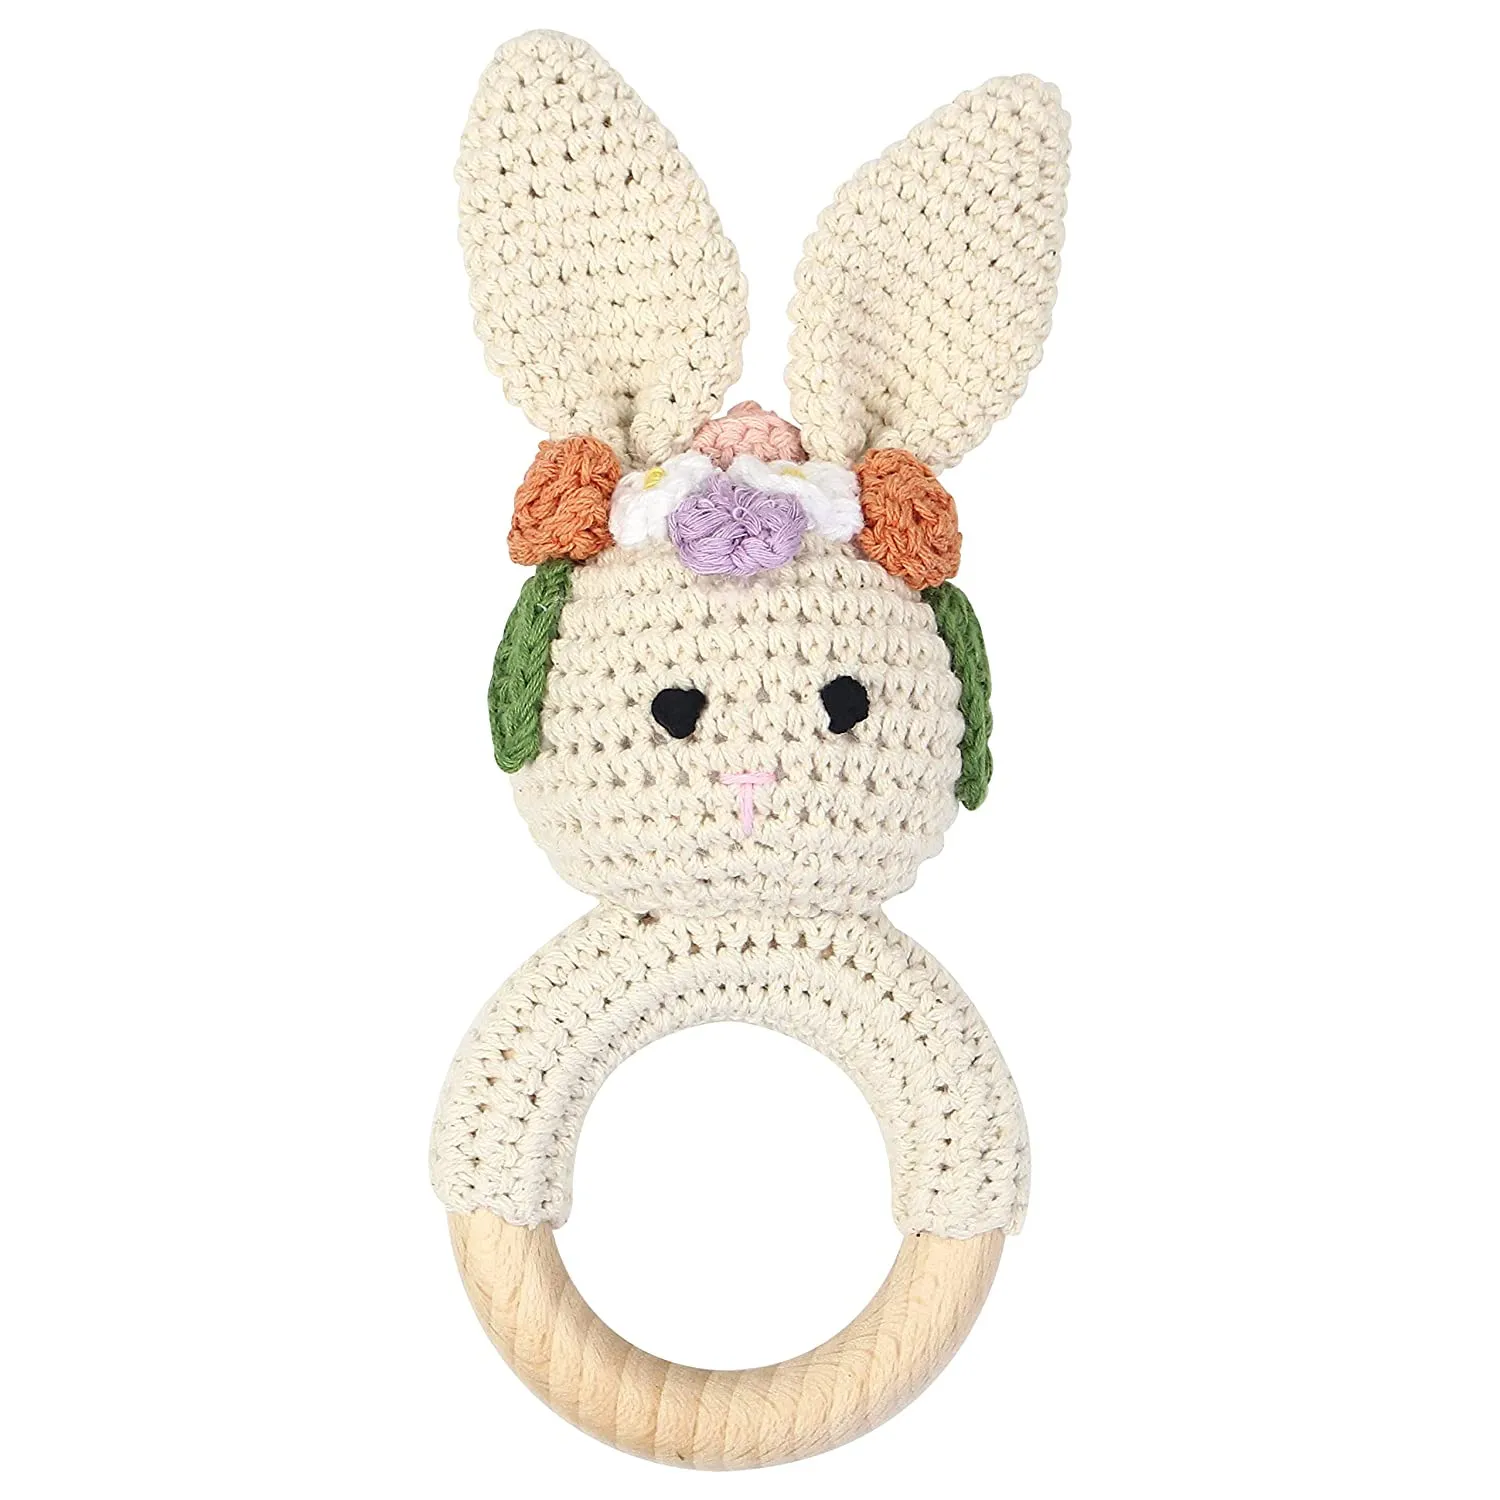 Natural Crochet Teether Toy Rattle For Handmade Animal Pattern On Natural Wooden Teething Ring Rattle Natural Baby Toys